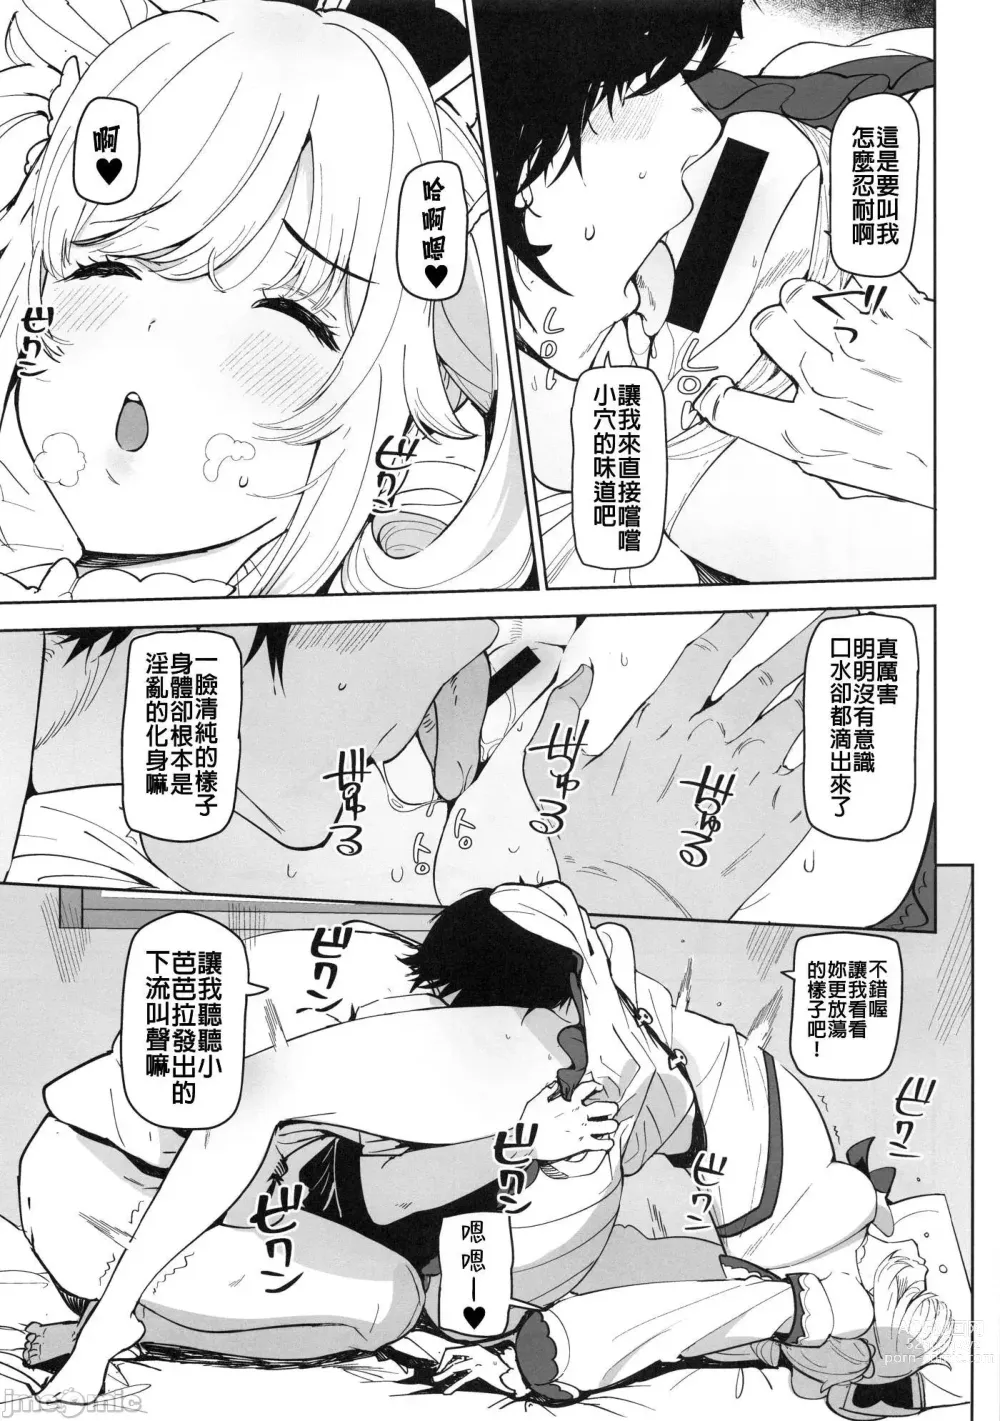 Page 10 of doujinshi 芭芭拉 入眠